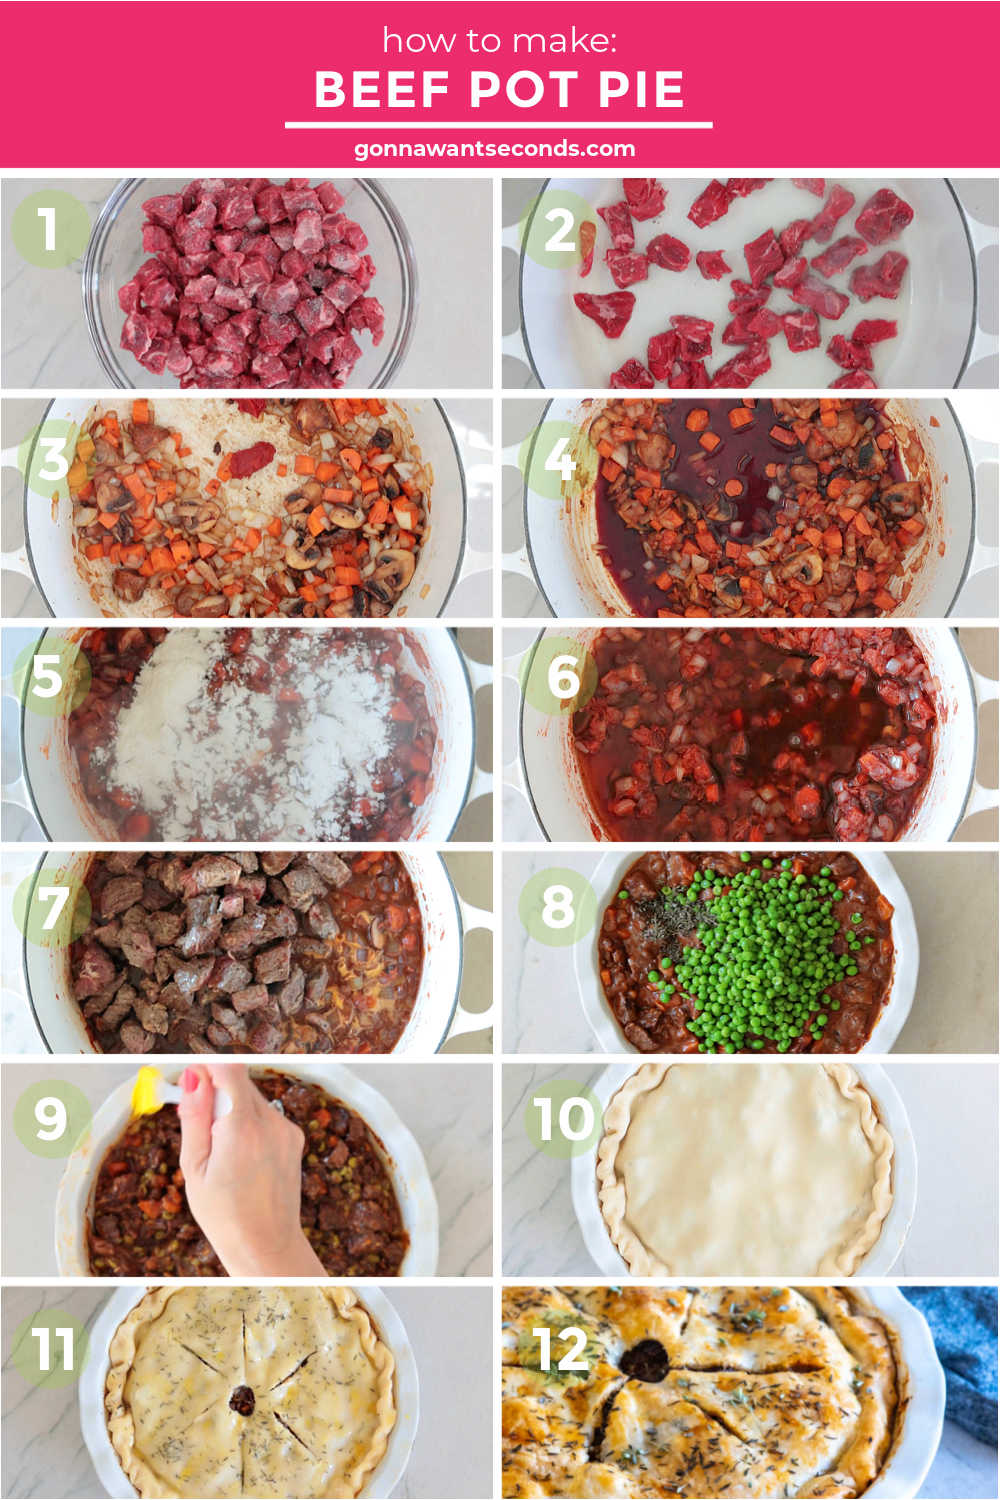 Step by step how to make beef pot pie